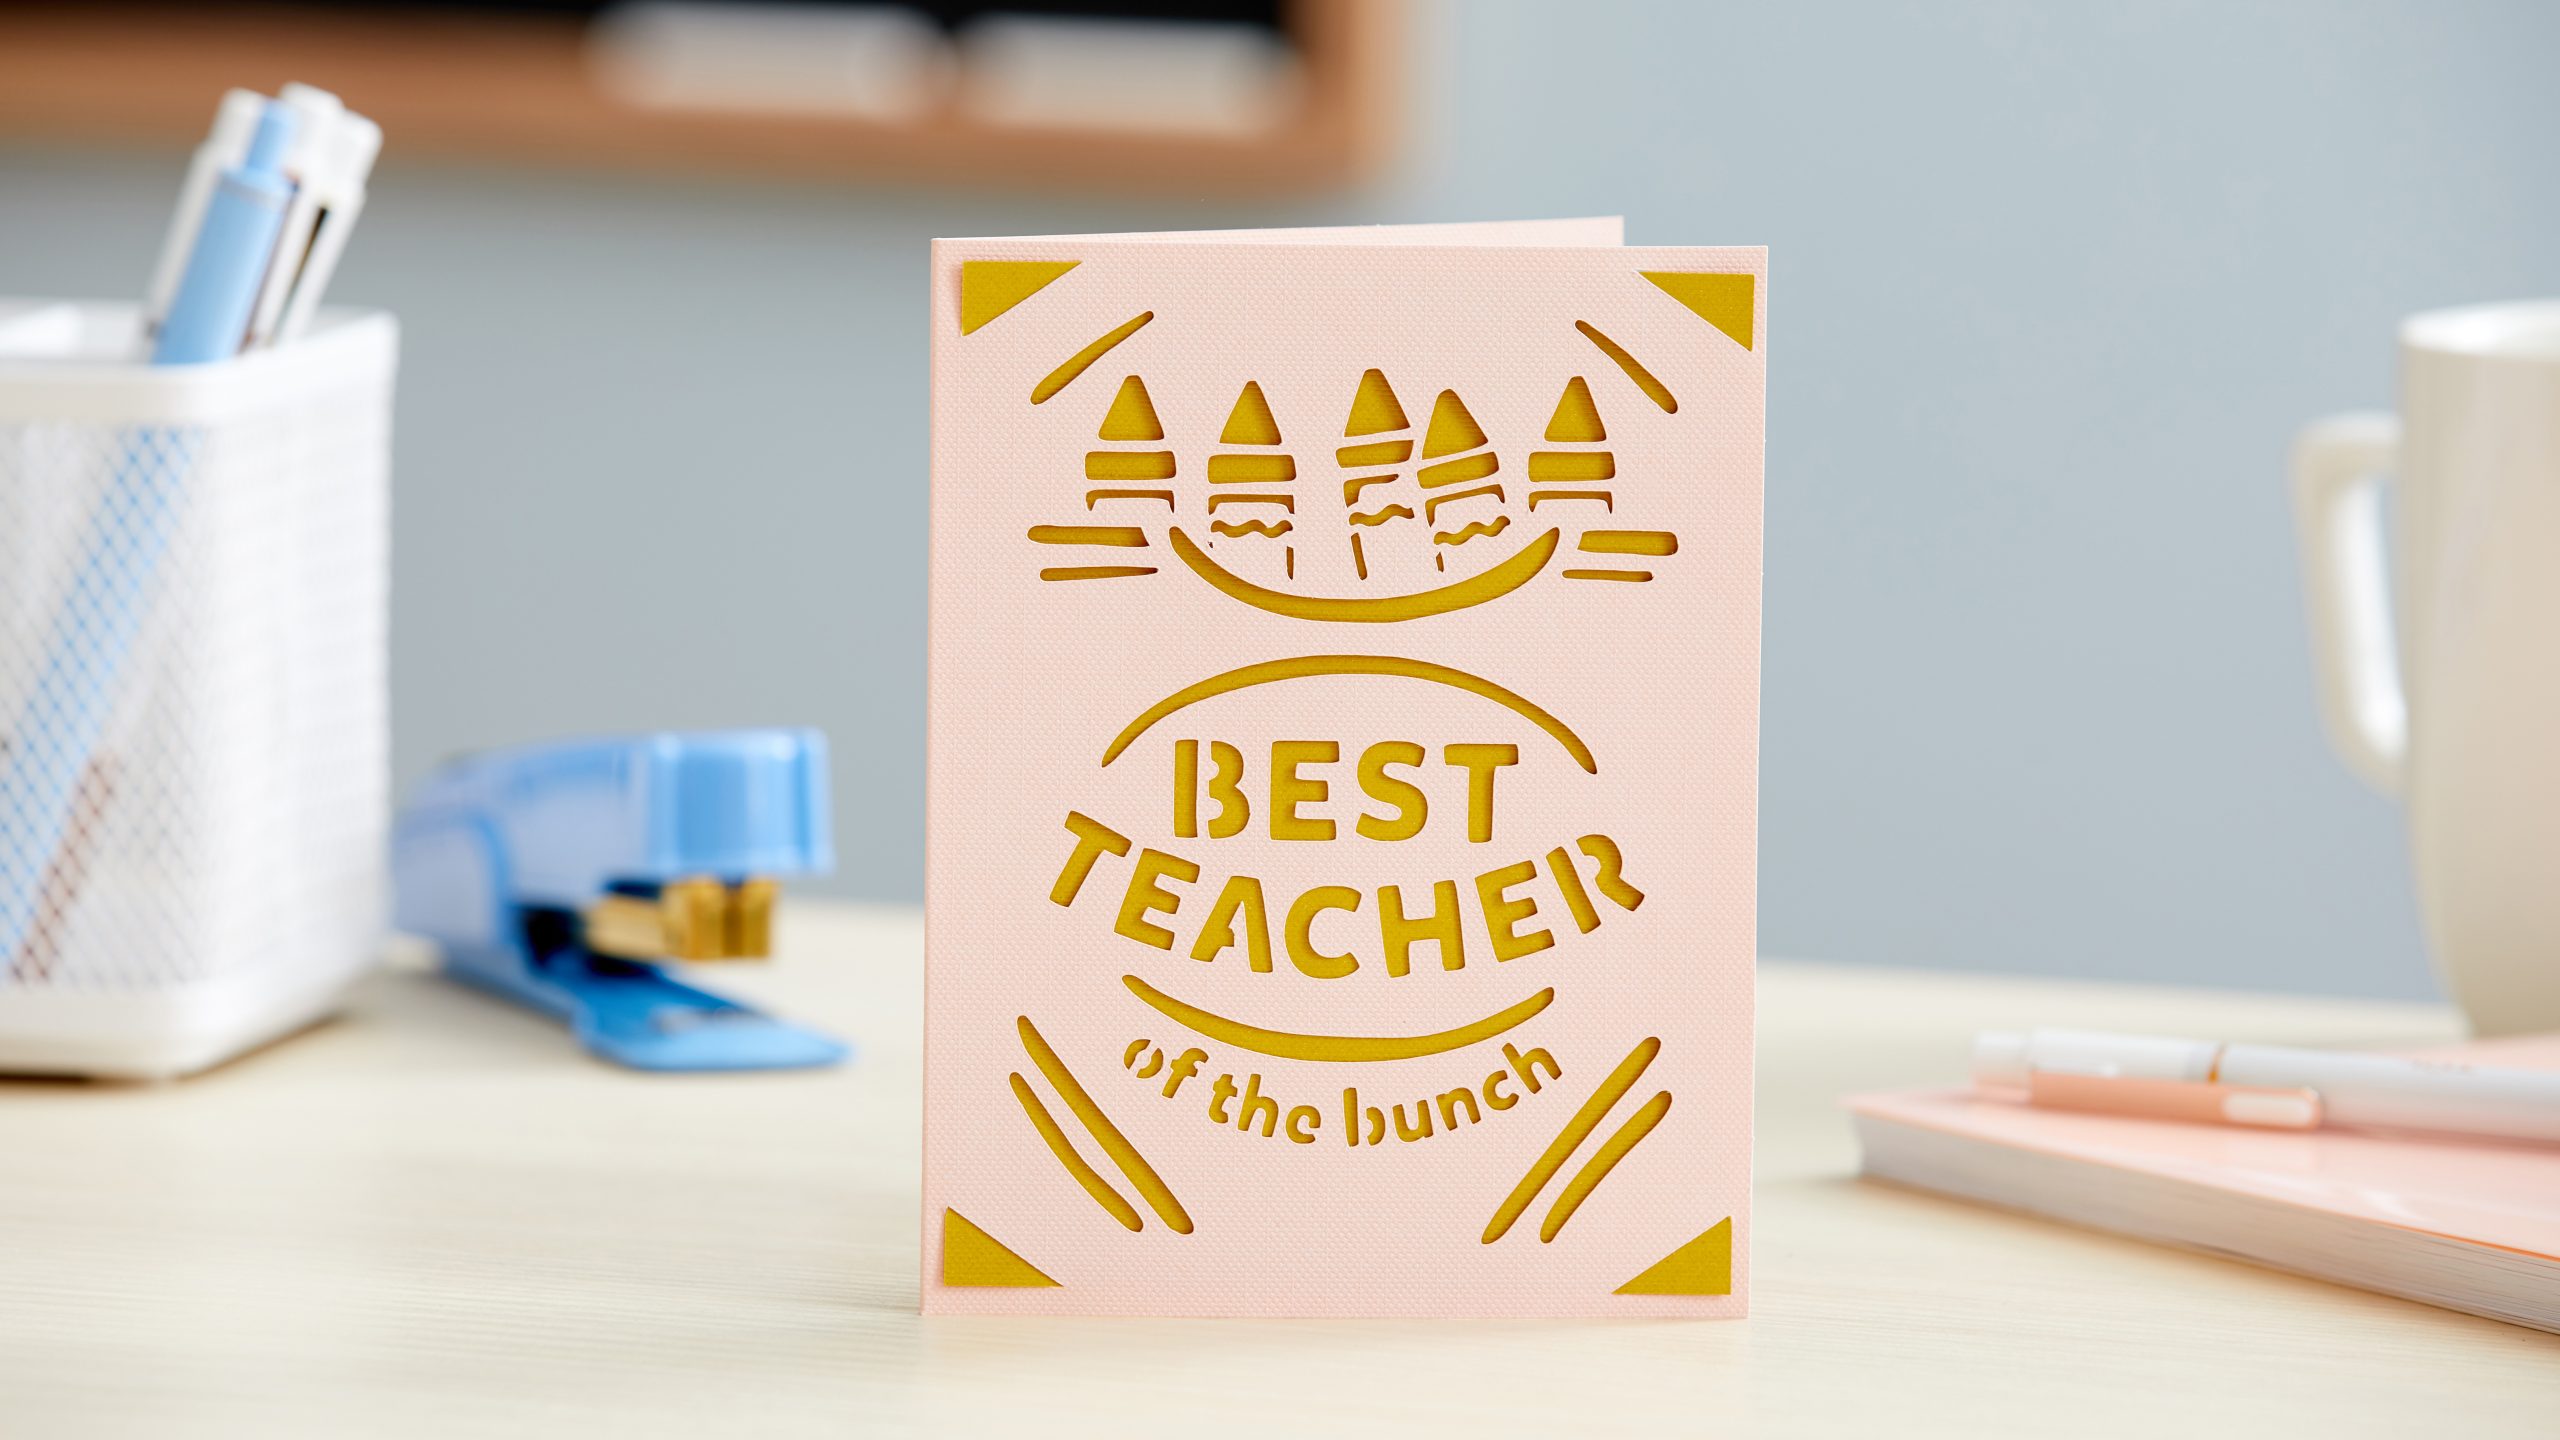 Show teacher appreciation with the gift of handmade